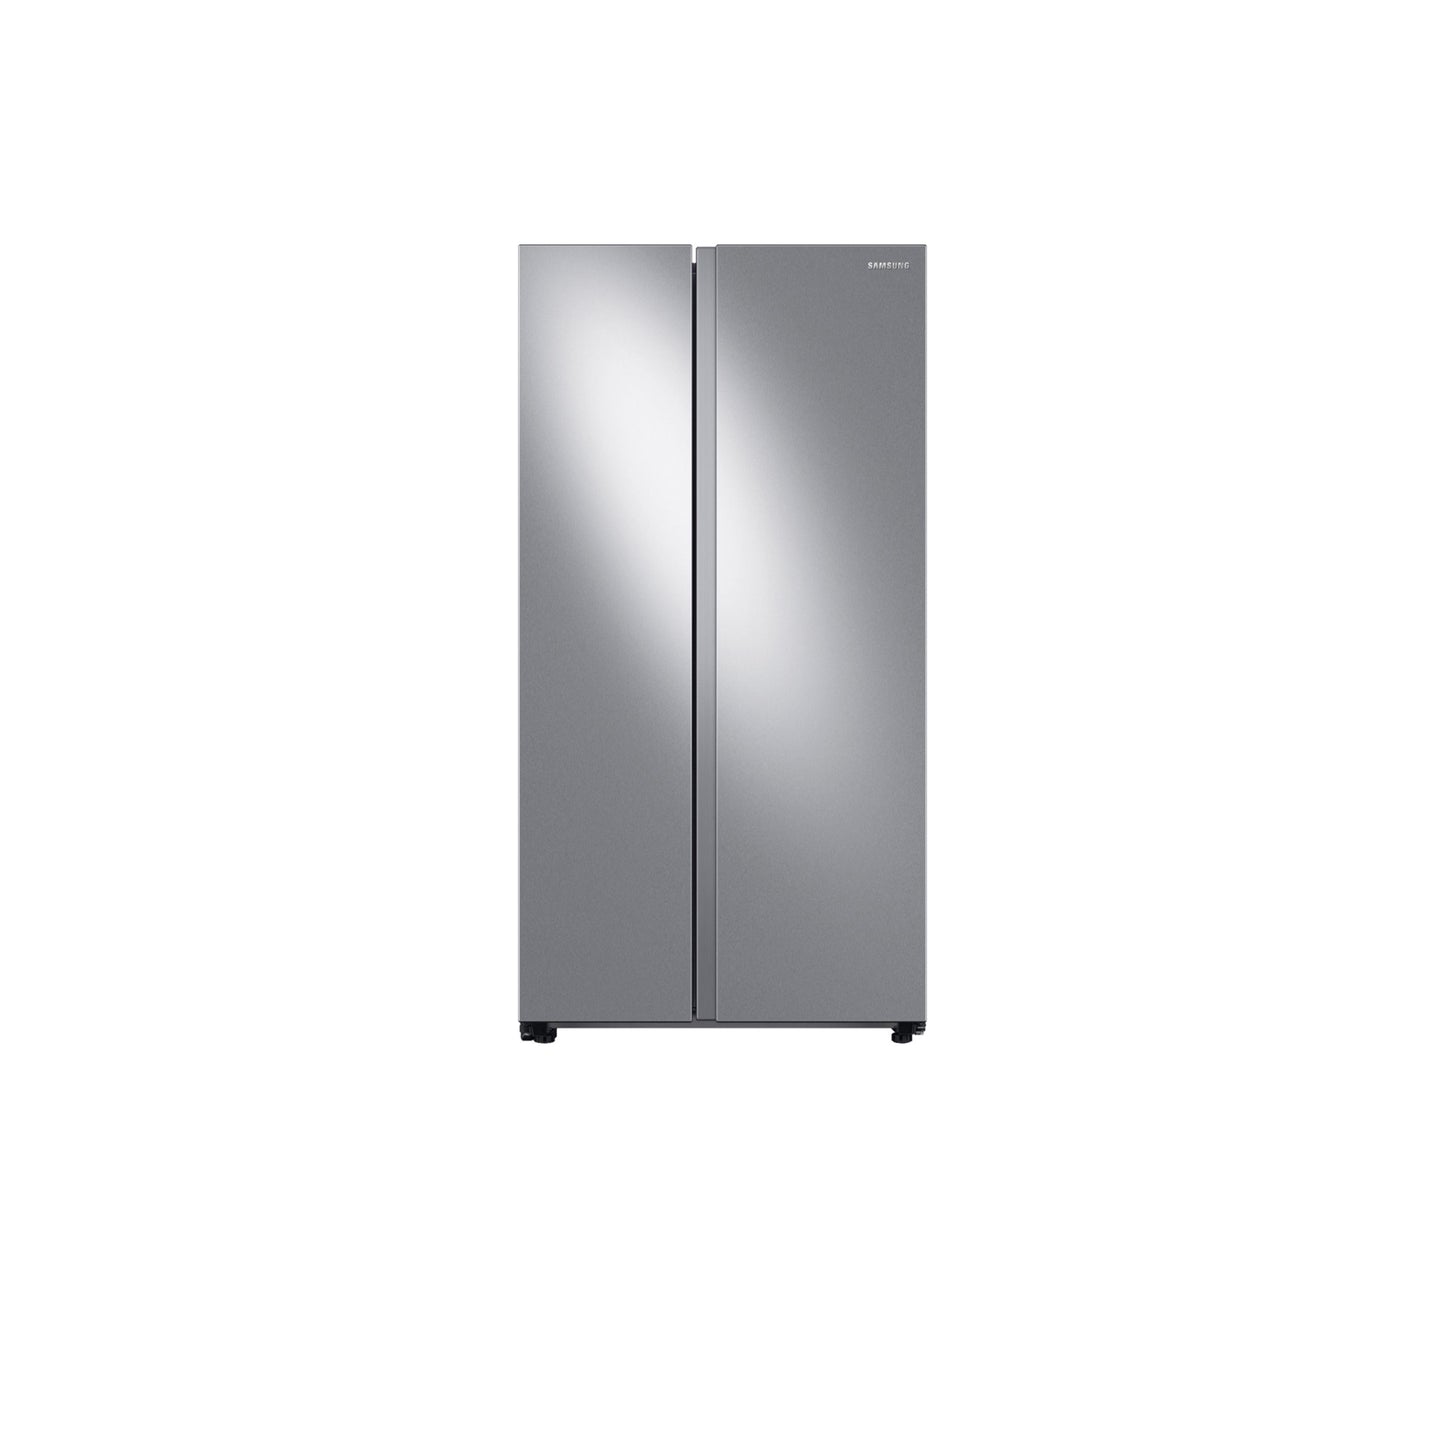 23 cu. ft. Smart Counter Depth Side-by-Side Refrigerator in Stainless Steel.